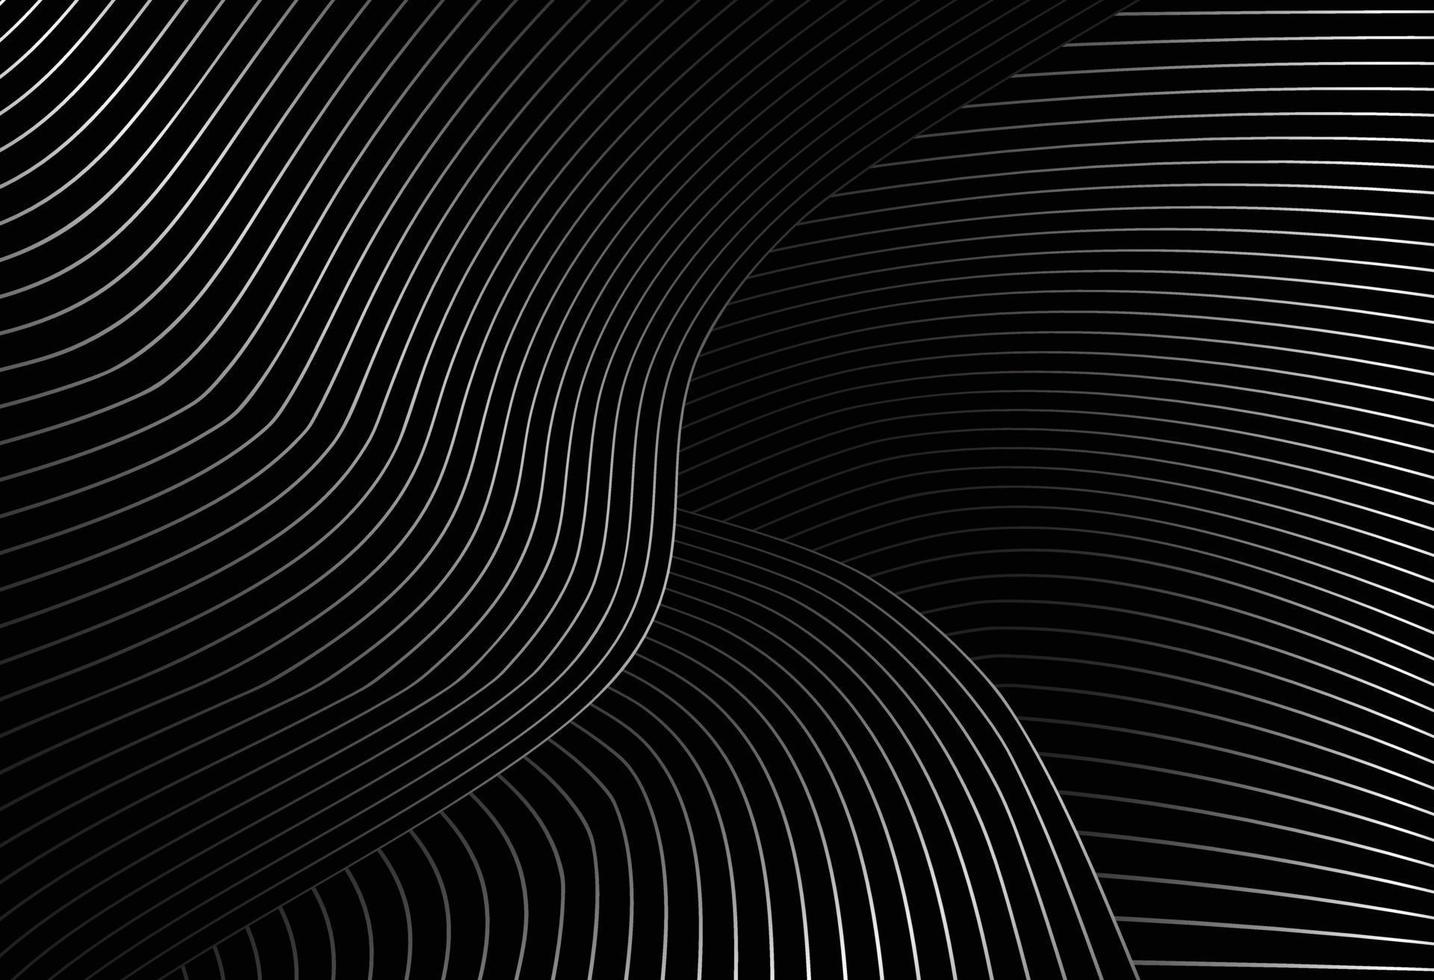 abstract black background with diagonal wave lines, Gradient vector retro line pattern design. Monochrome graphic.